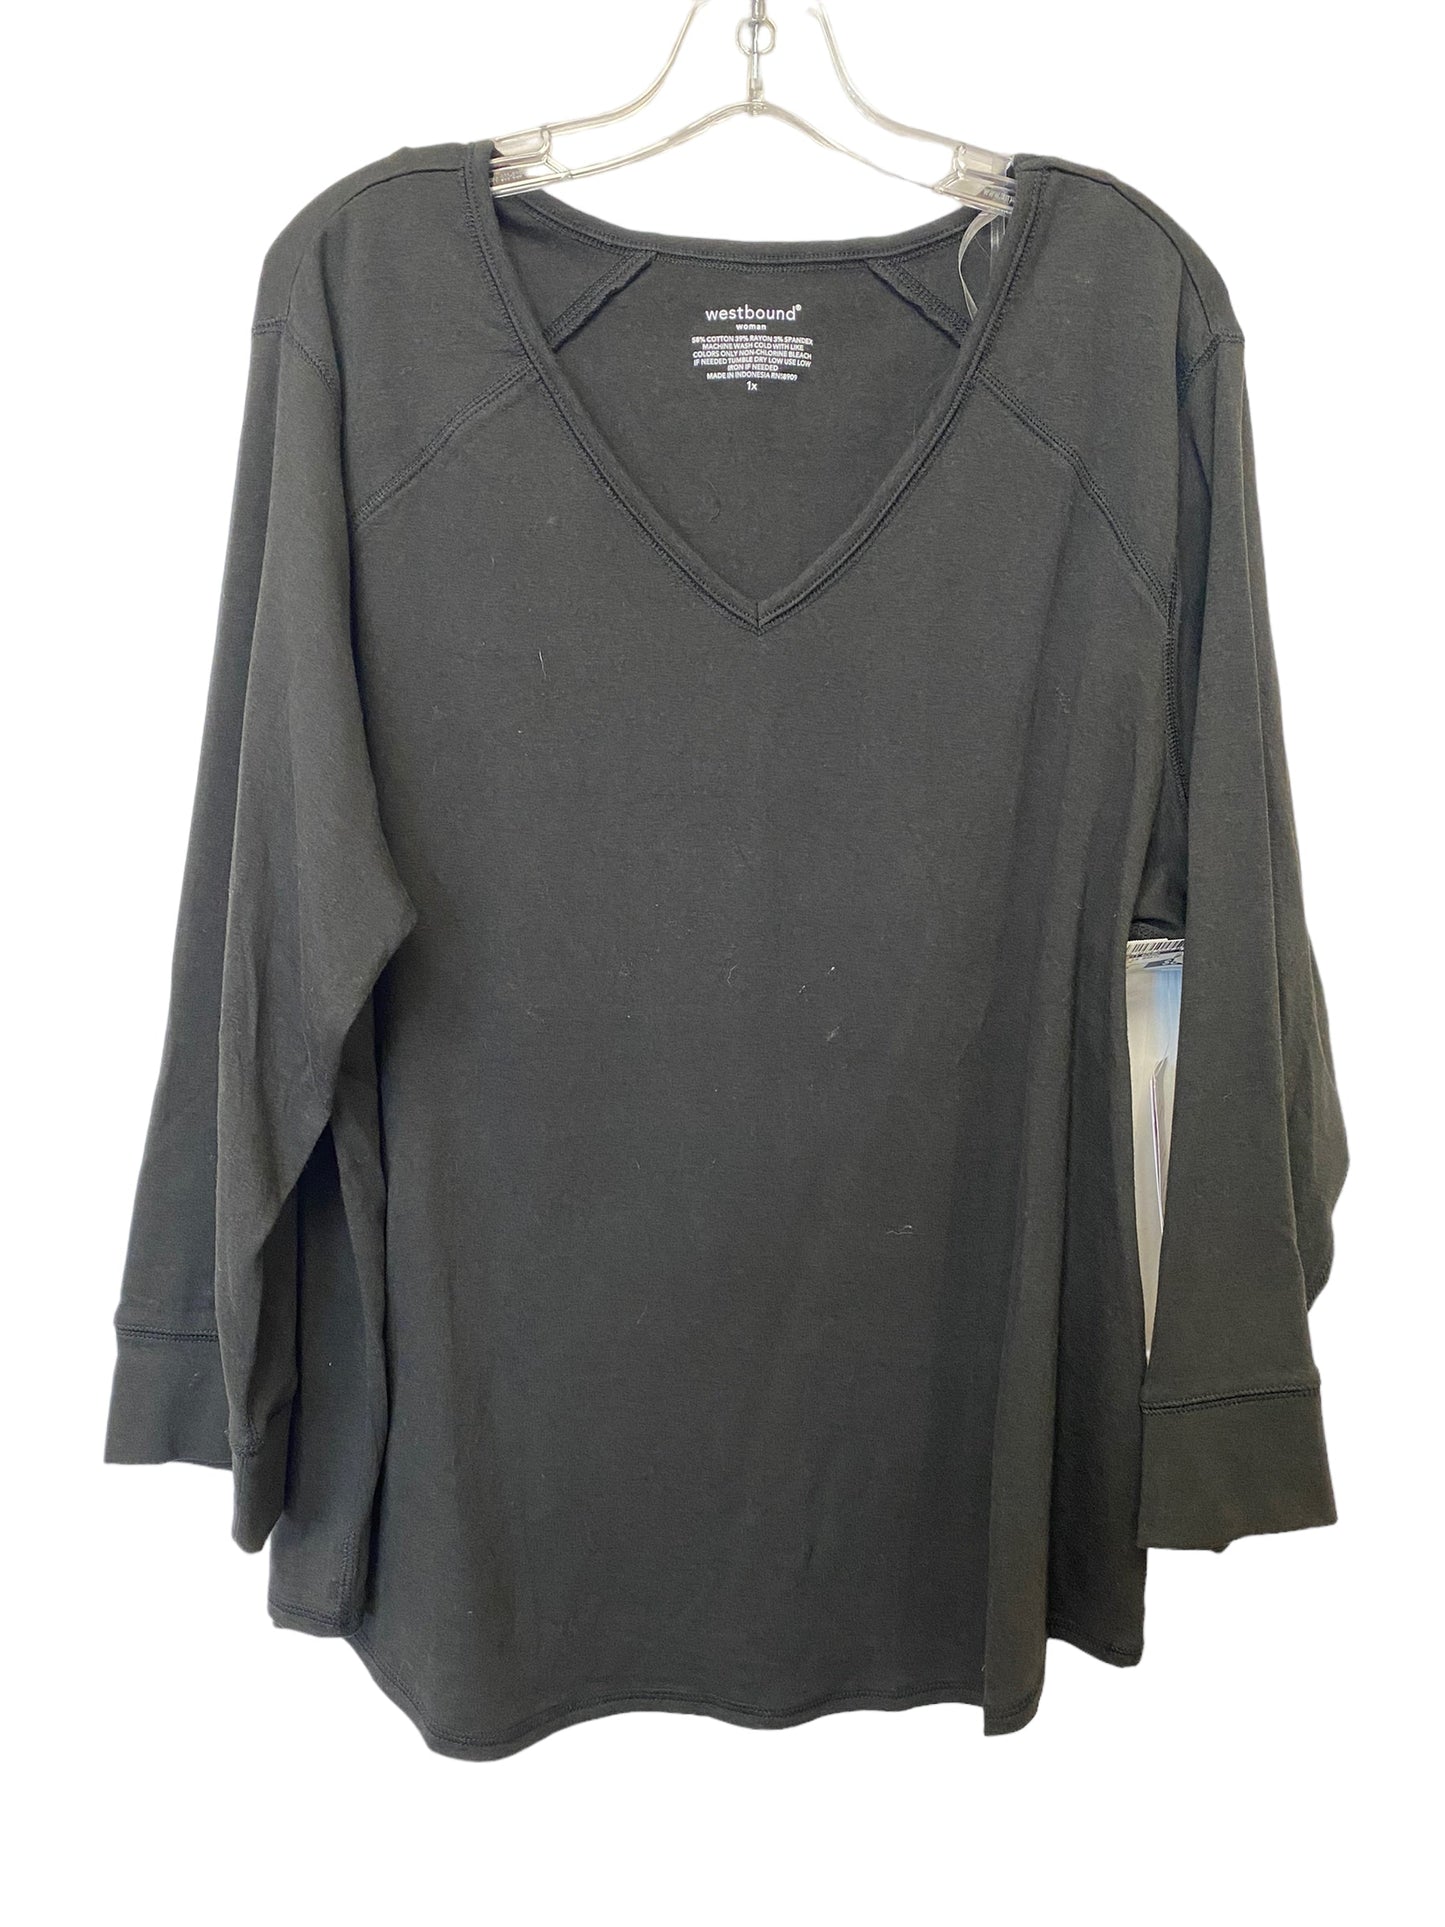 Top Long Sleeve Basic By West Bound  Size: 1x